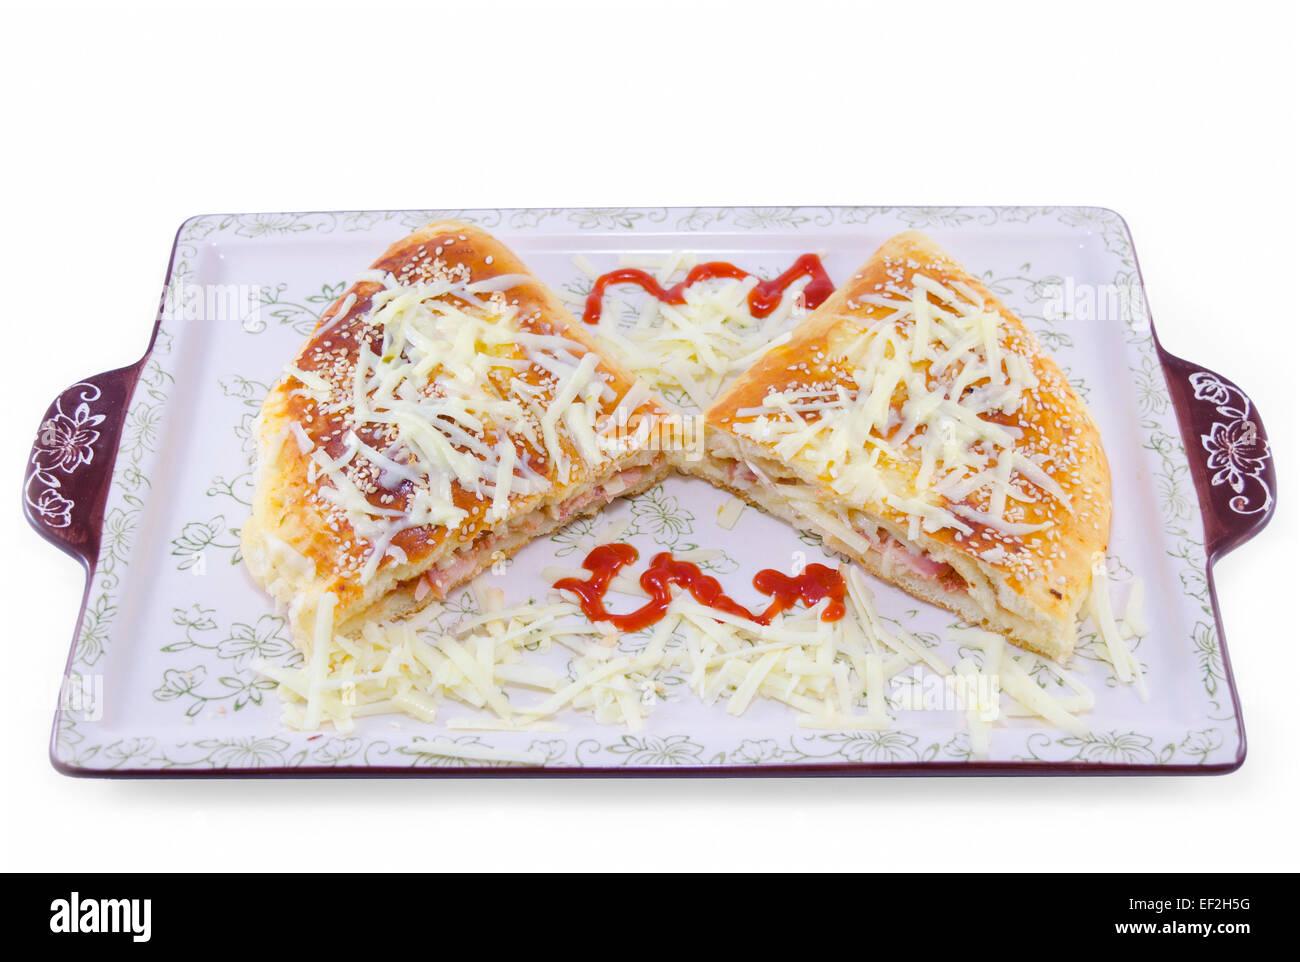 Stuffed pizza cut in half decorated with grated cheese on a plate, isolated on white background Stock Photo